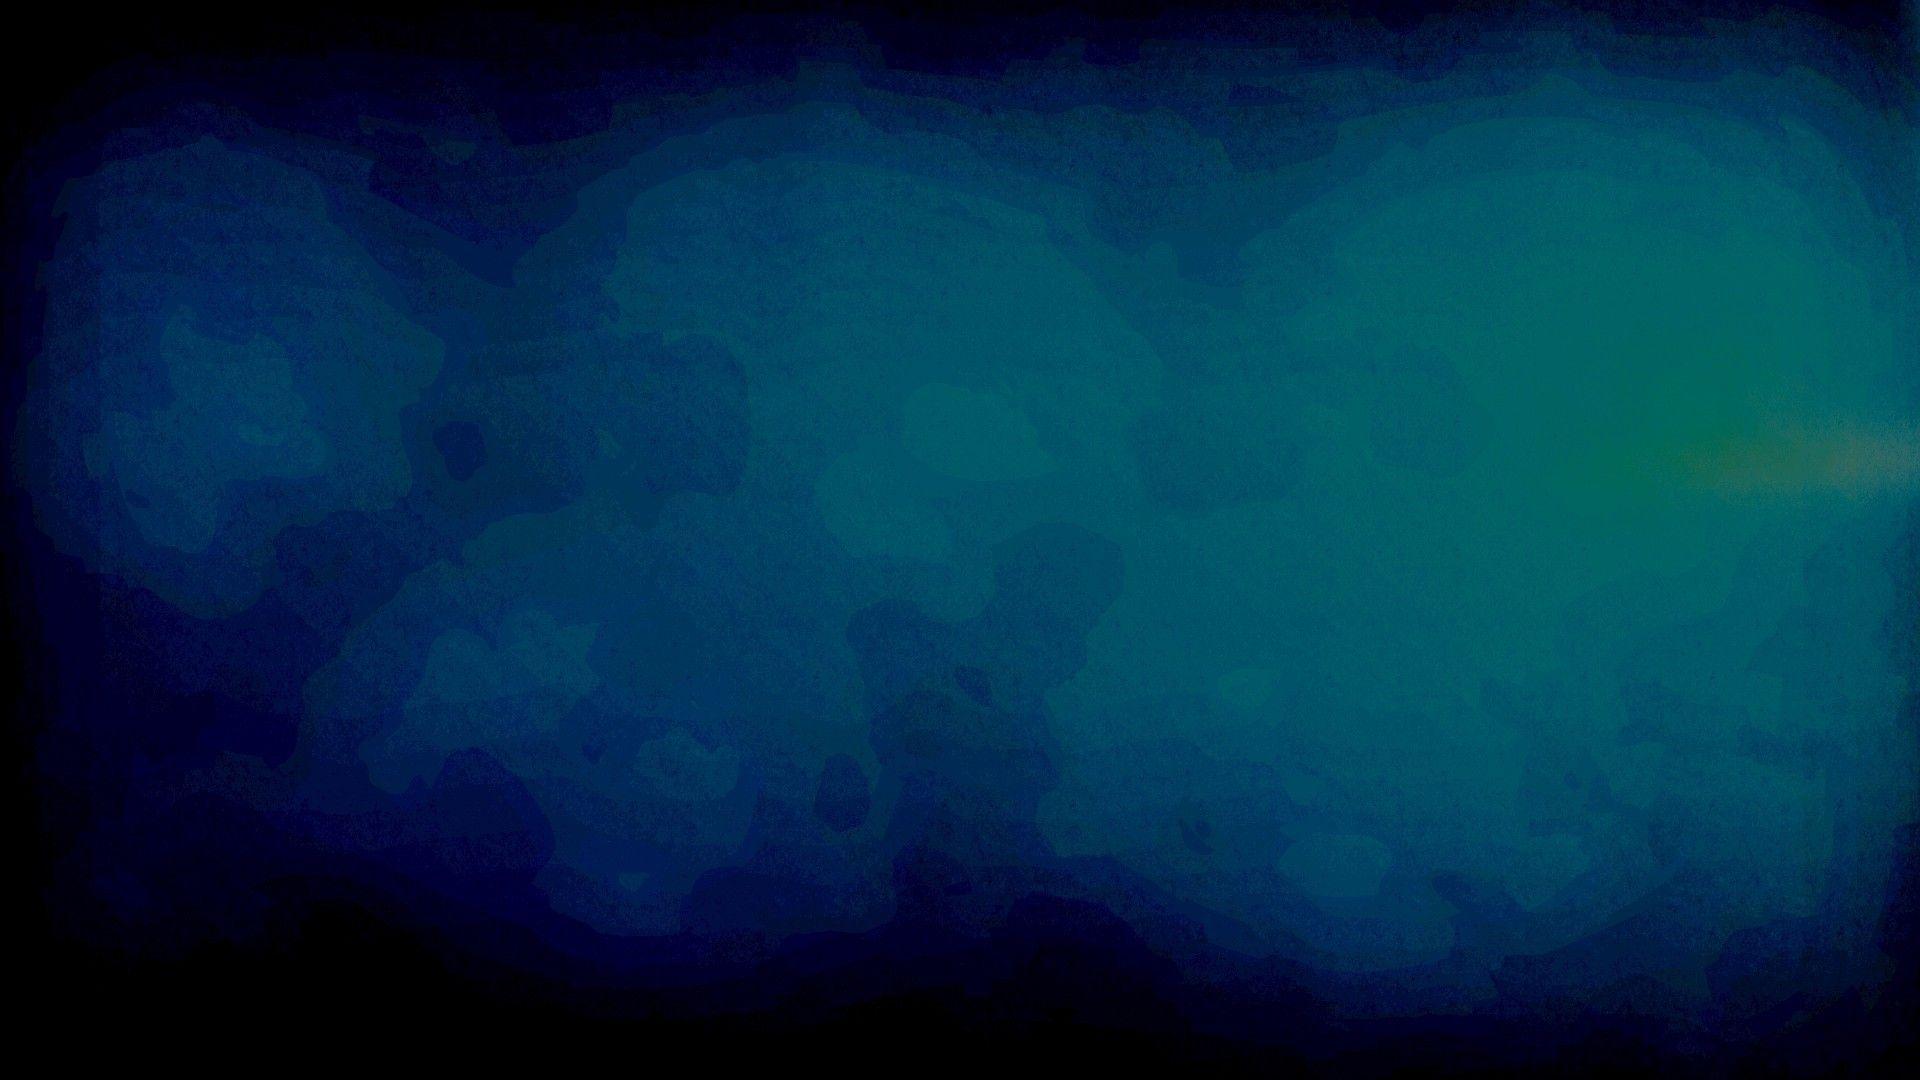 Simple Abstractblue Picture 5 HD Wallpaper. Hdimges